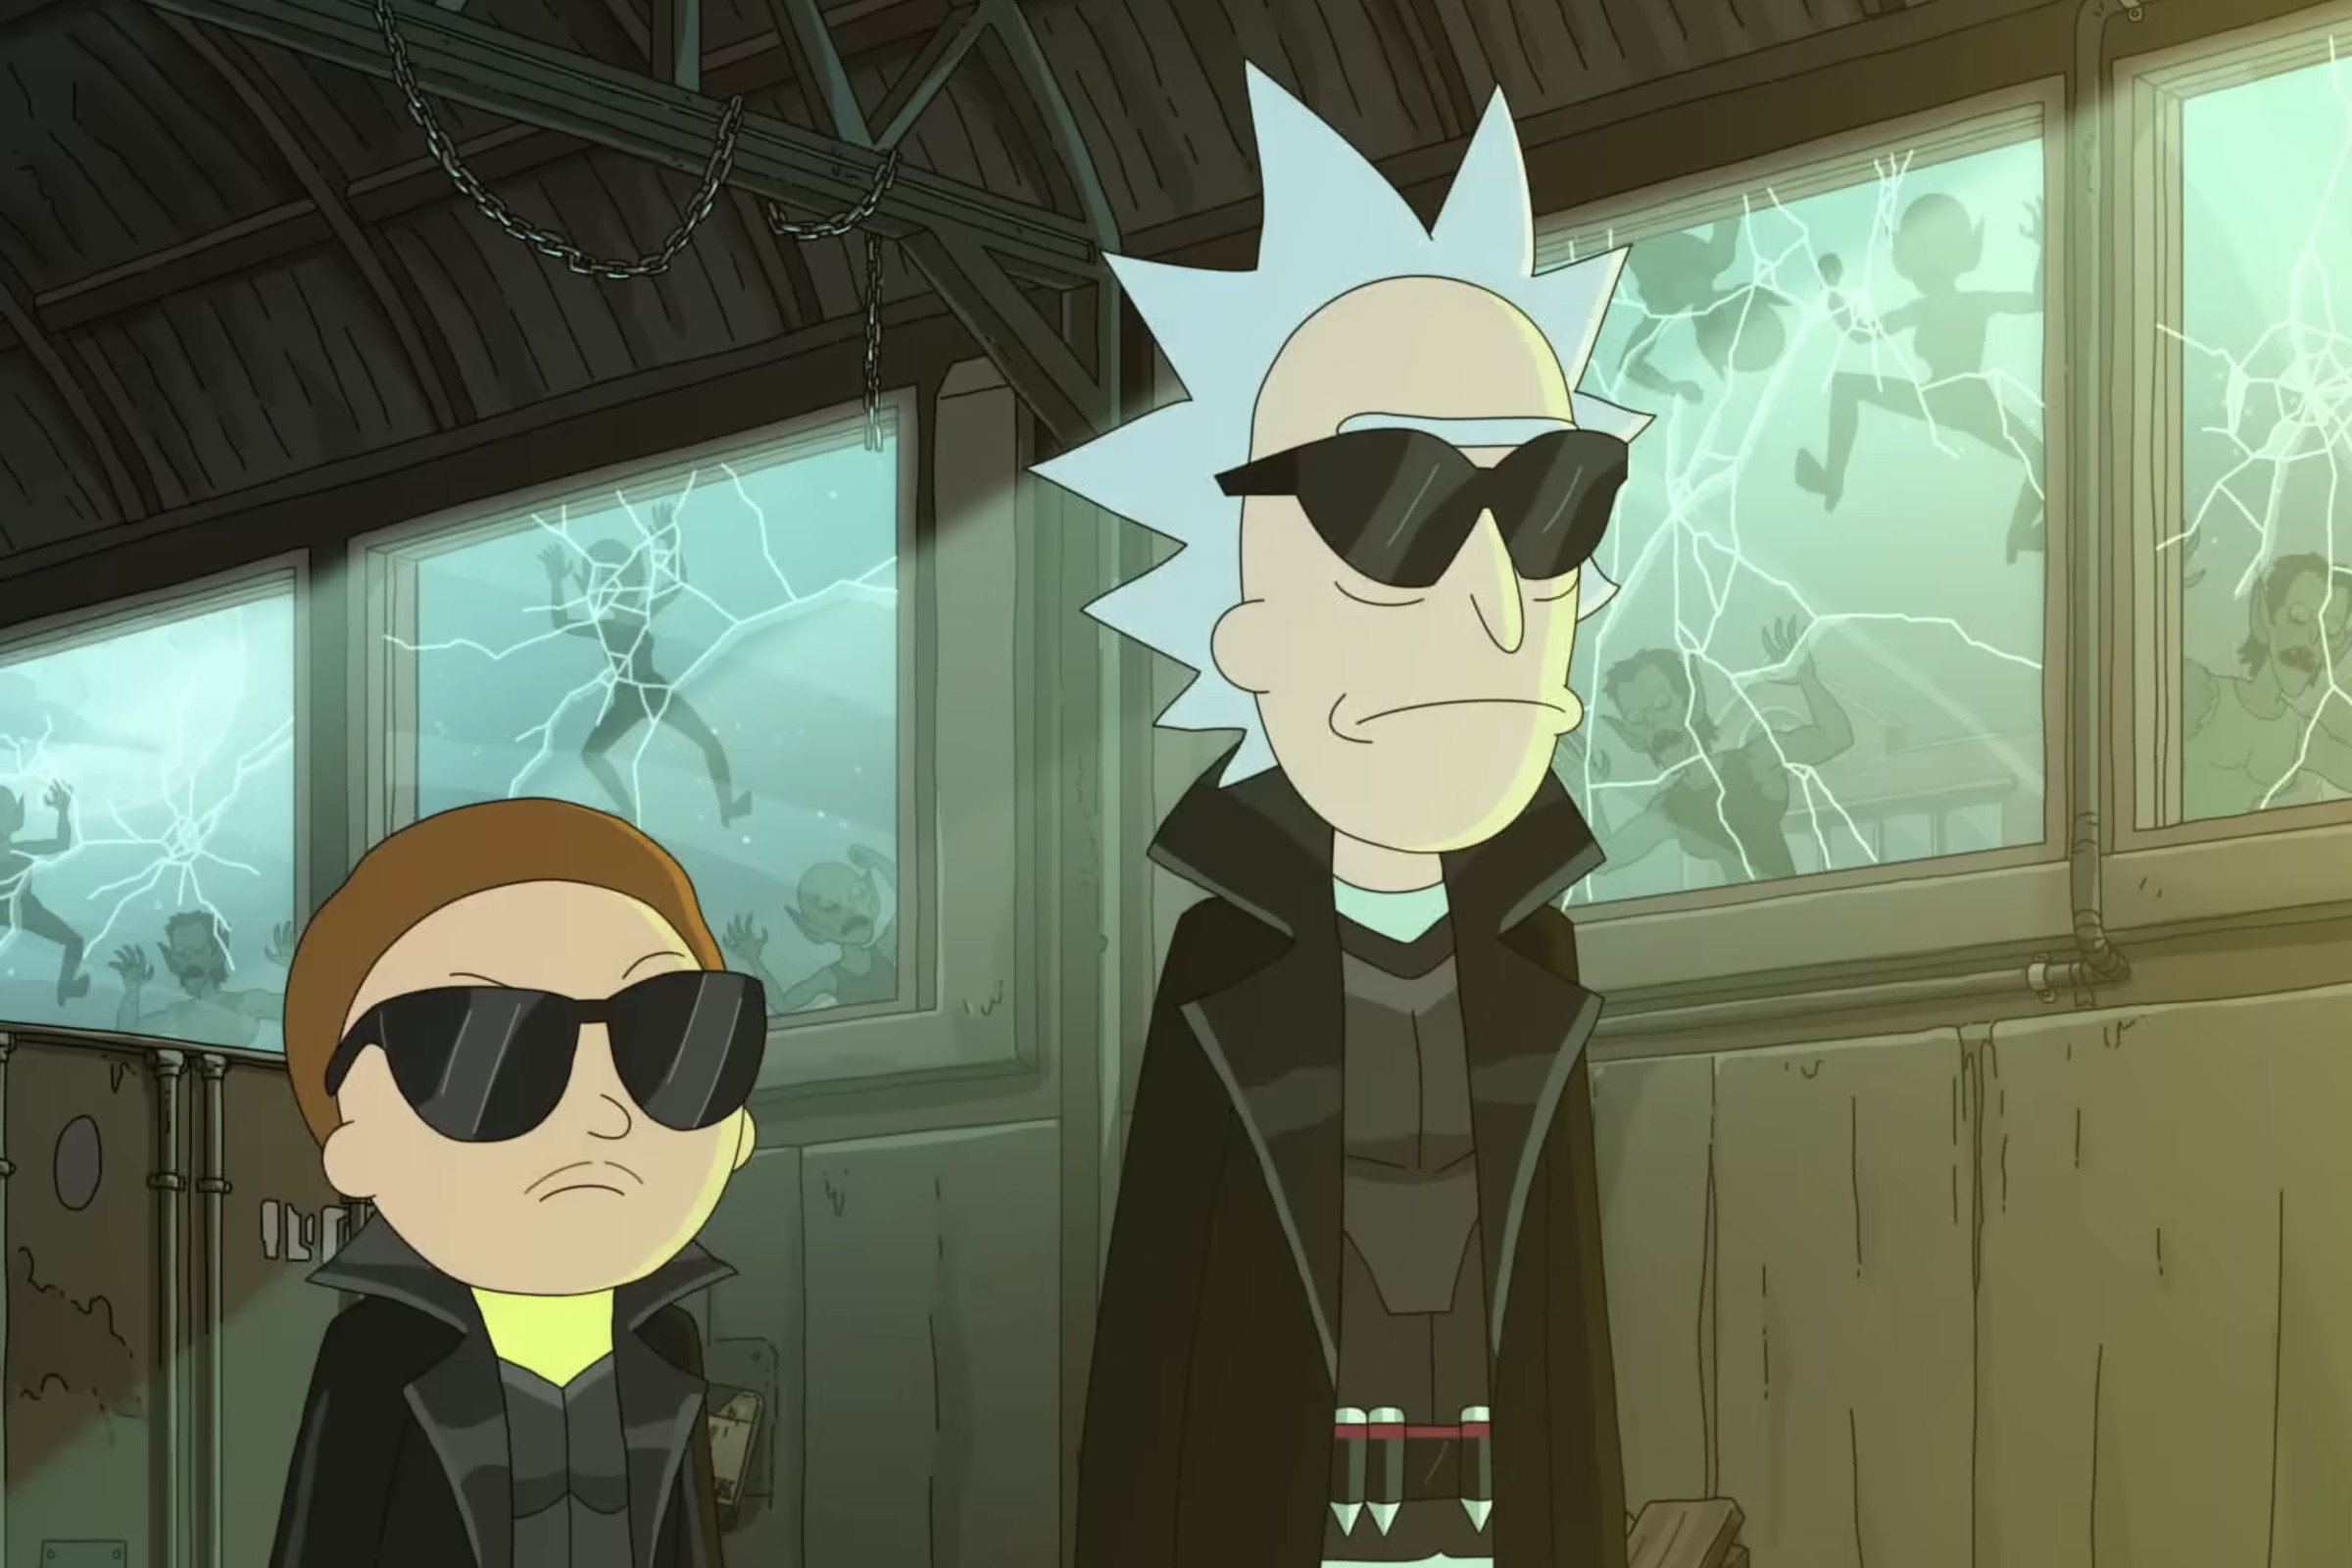 Morty and Rick on a mission.